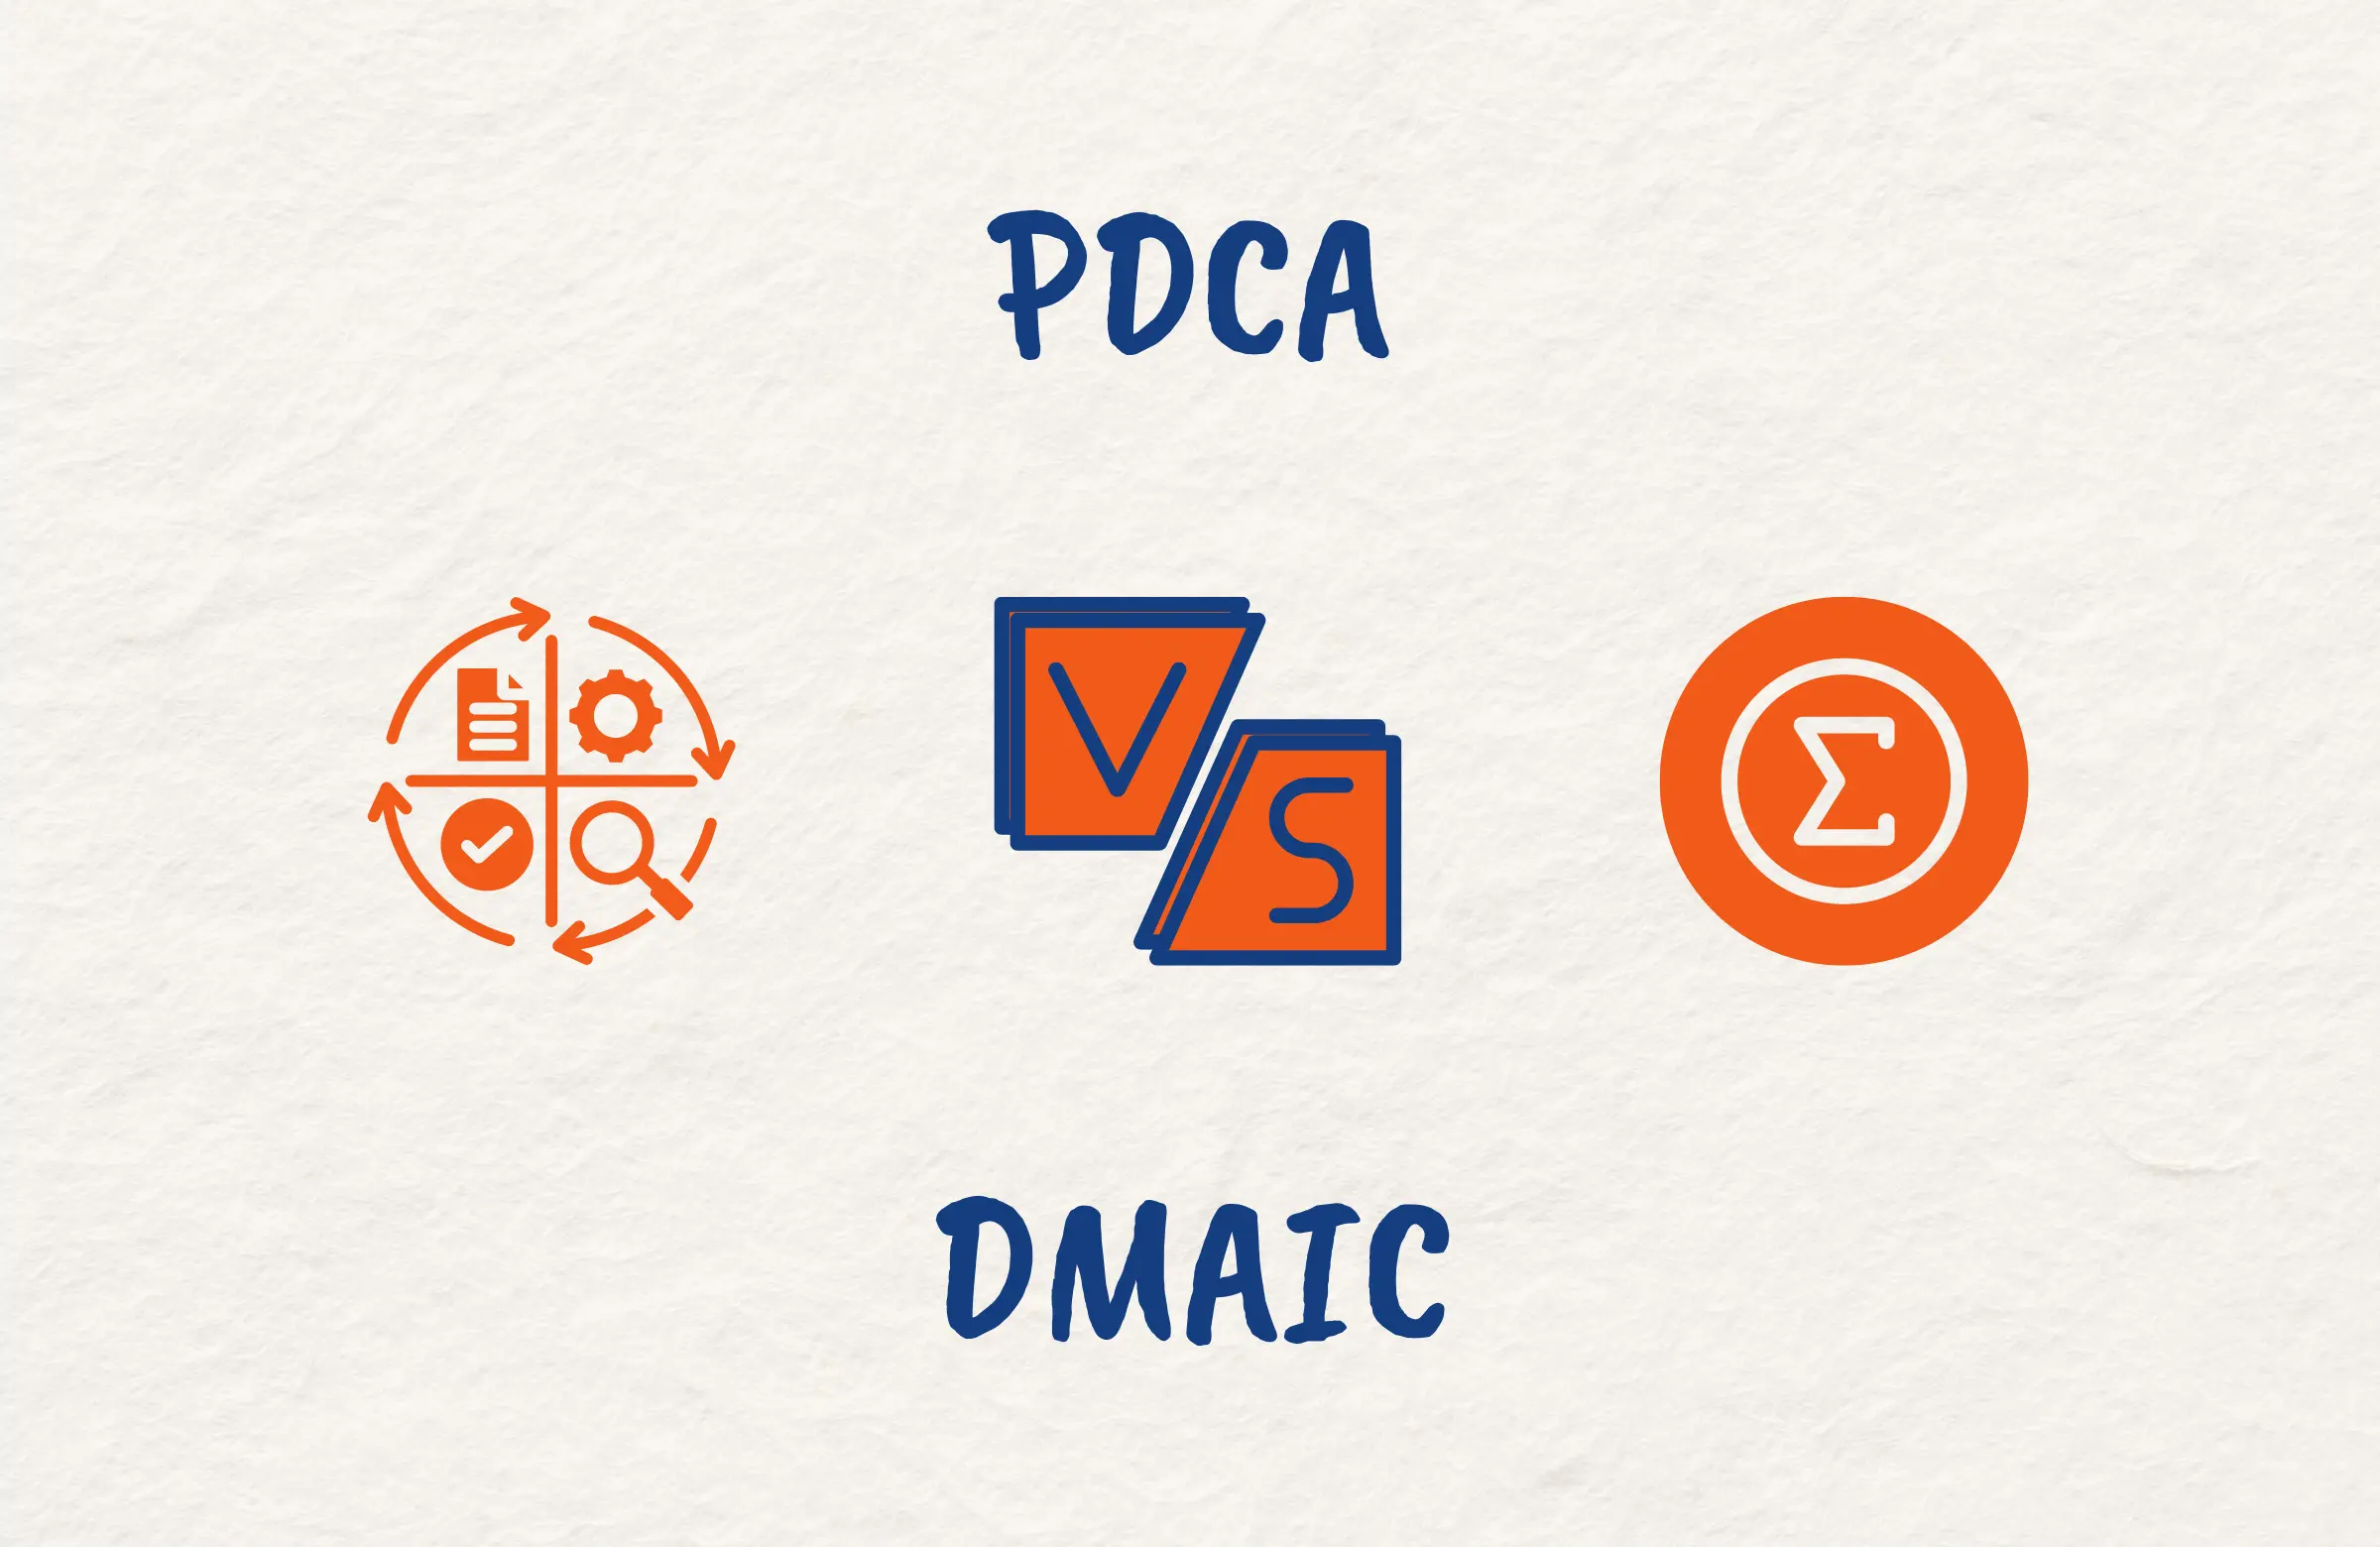 PDCA vs DMAIC Overview